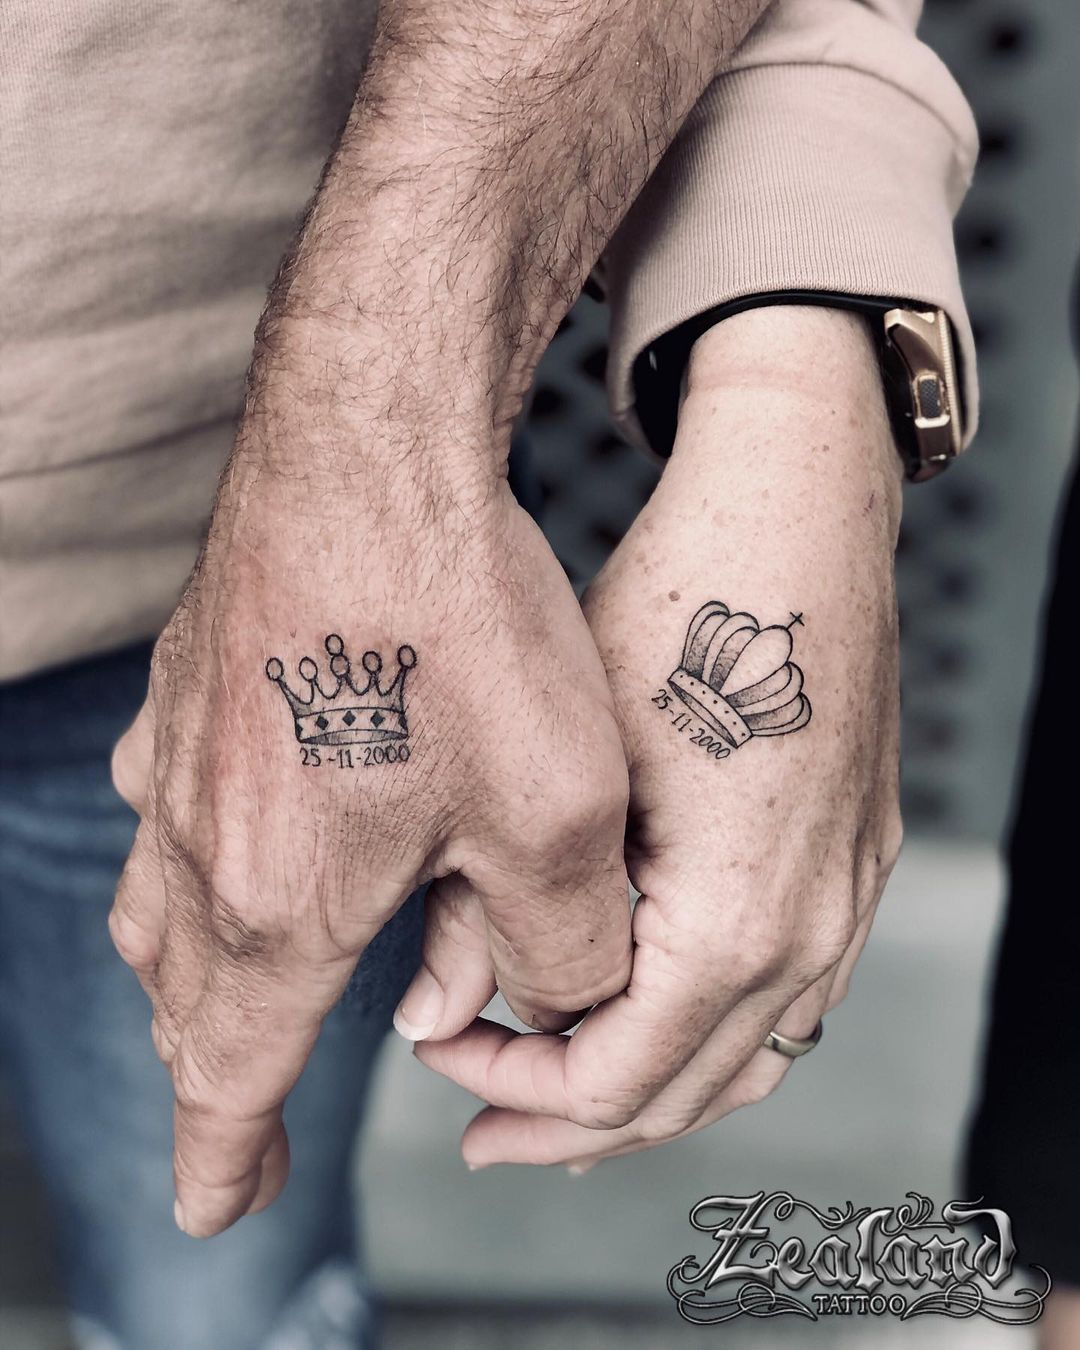 Tattoo Ideas For Women - King and Queen Tattoo